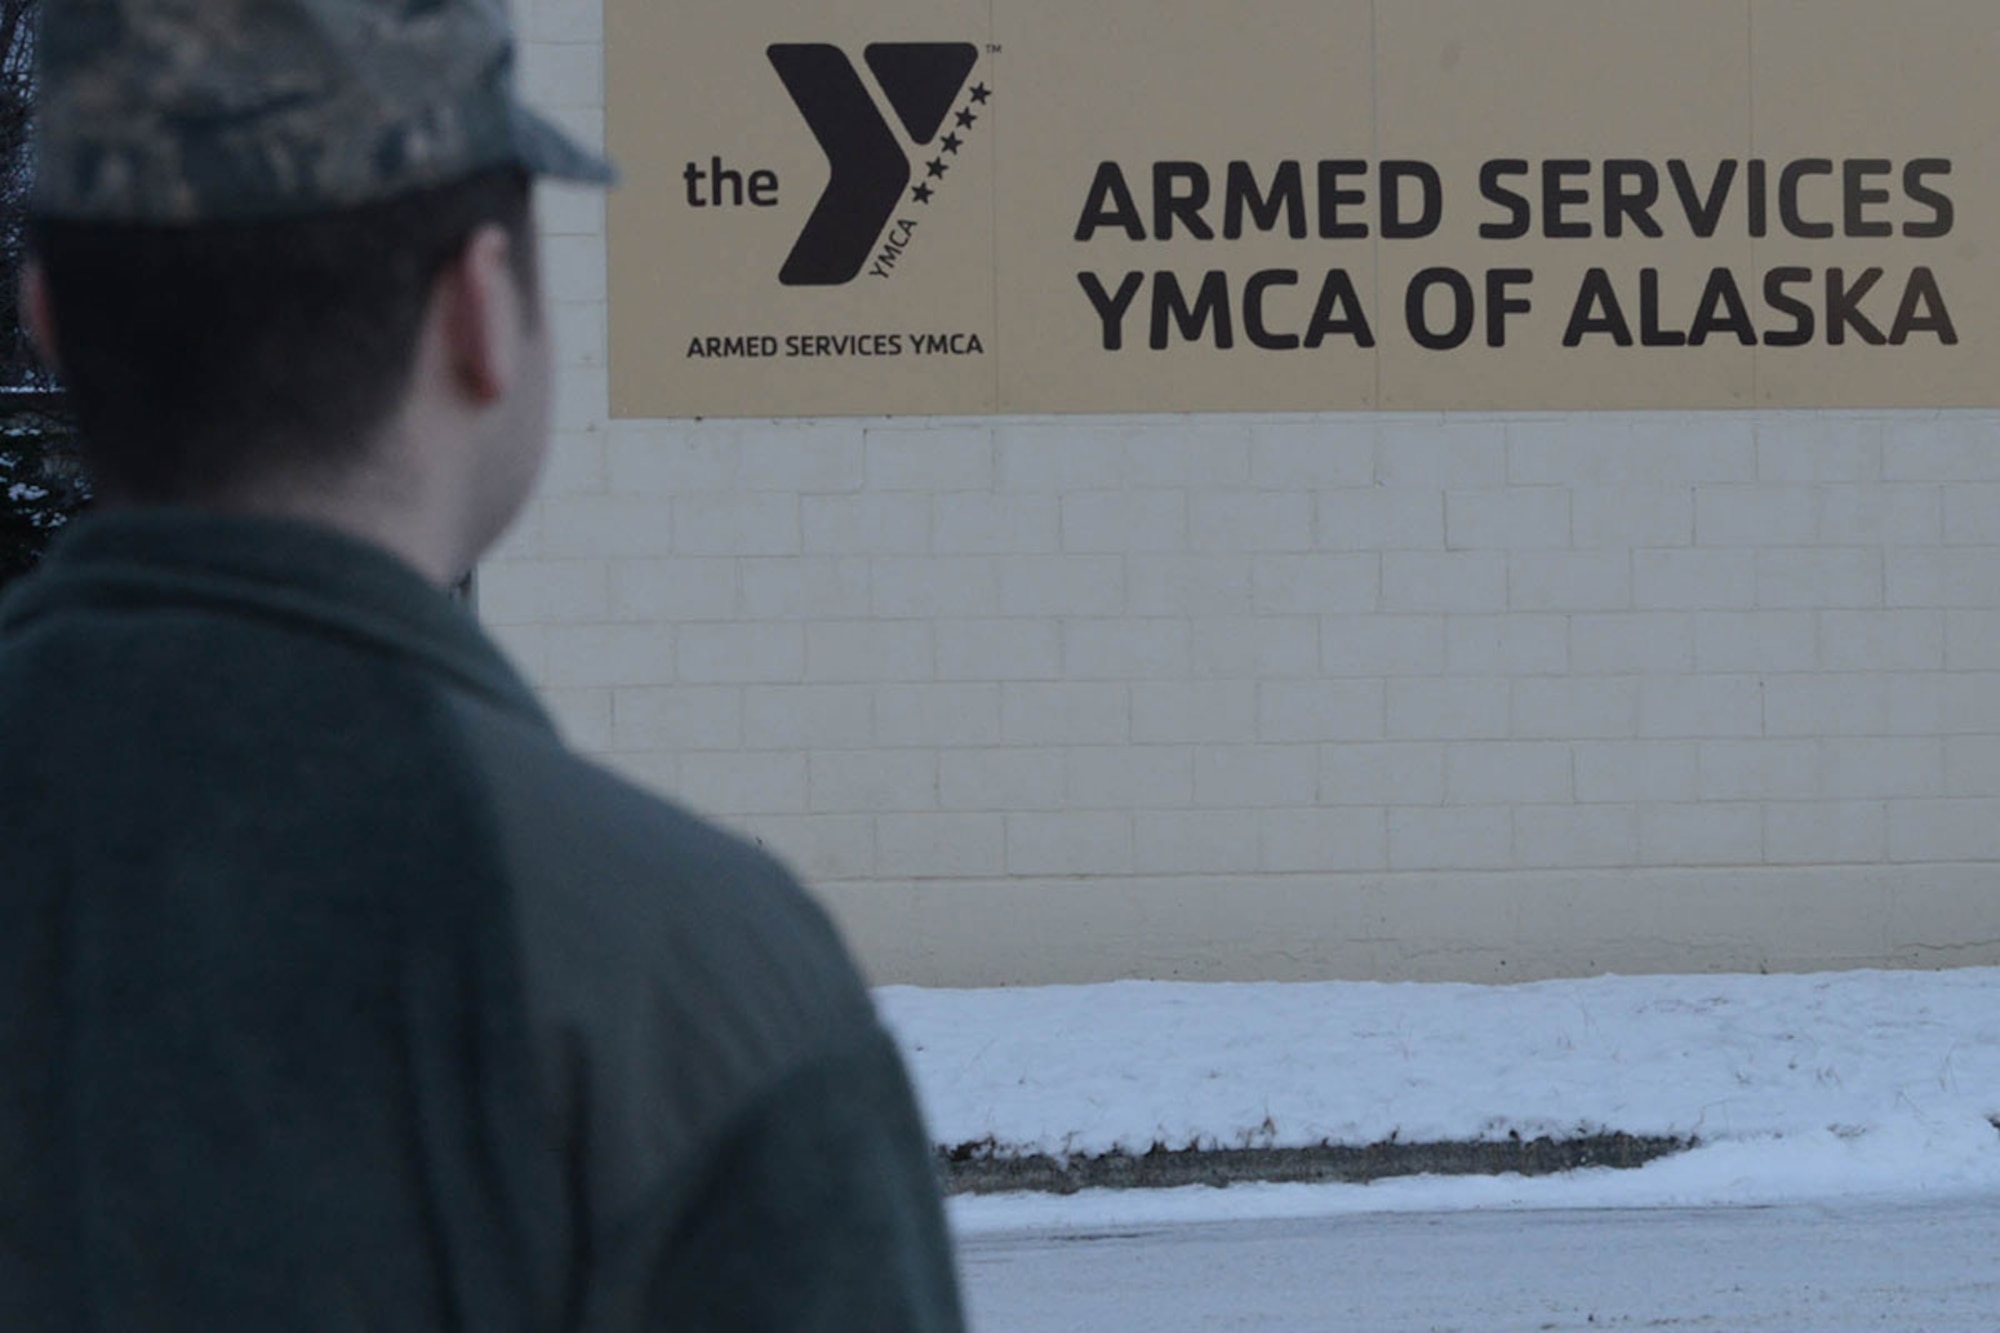 The Armed Services YMCA of Alaska Headquarters is located on Joint Base Elmendorf-Richardson. The ASYMCA staff work with base leadership to enhance services needed on the installation. (U.S. Air Force photo by Airman 1st Class Javier Alvarez)